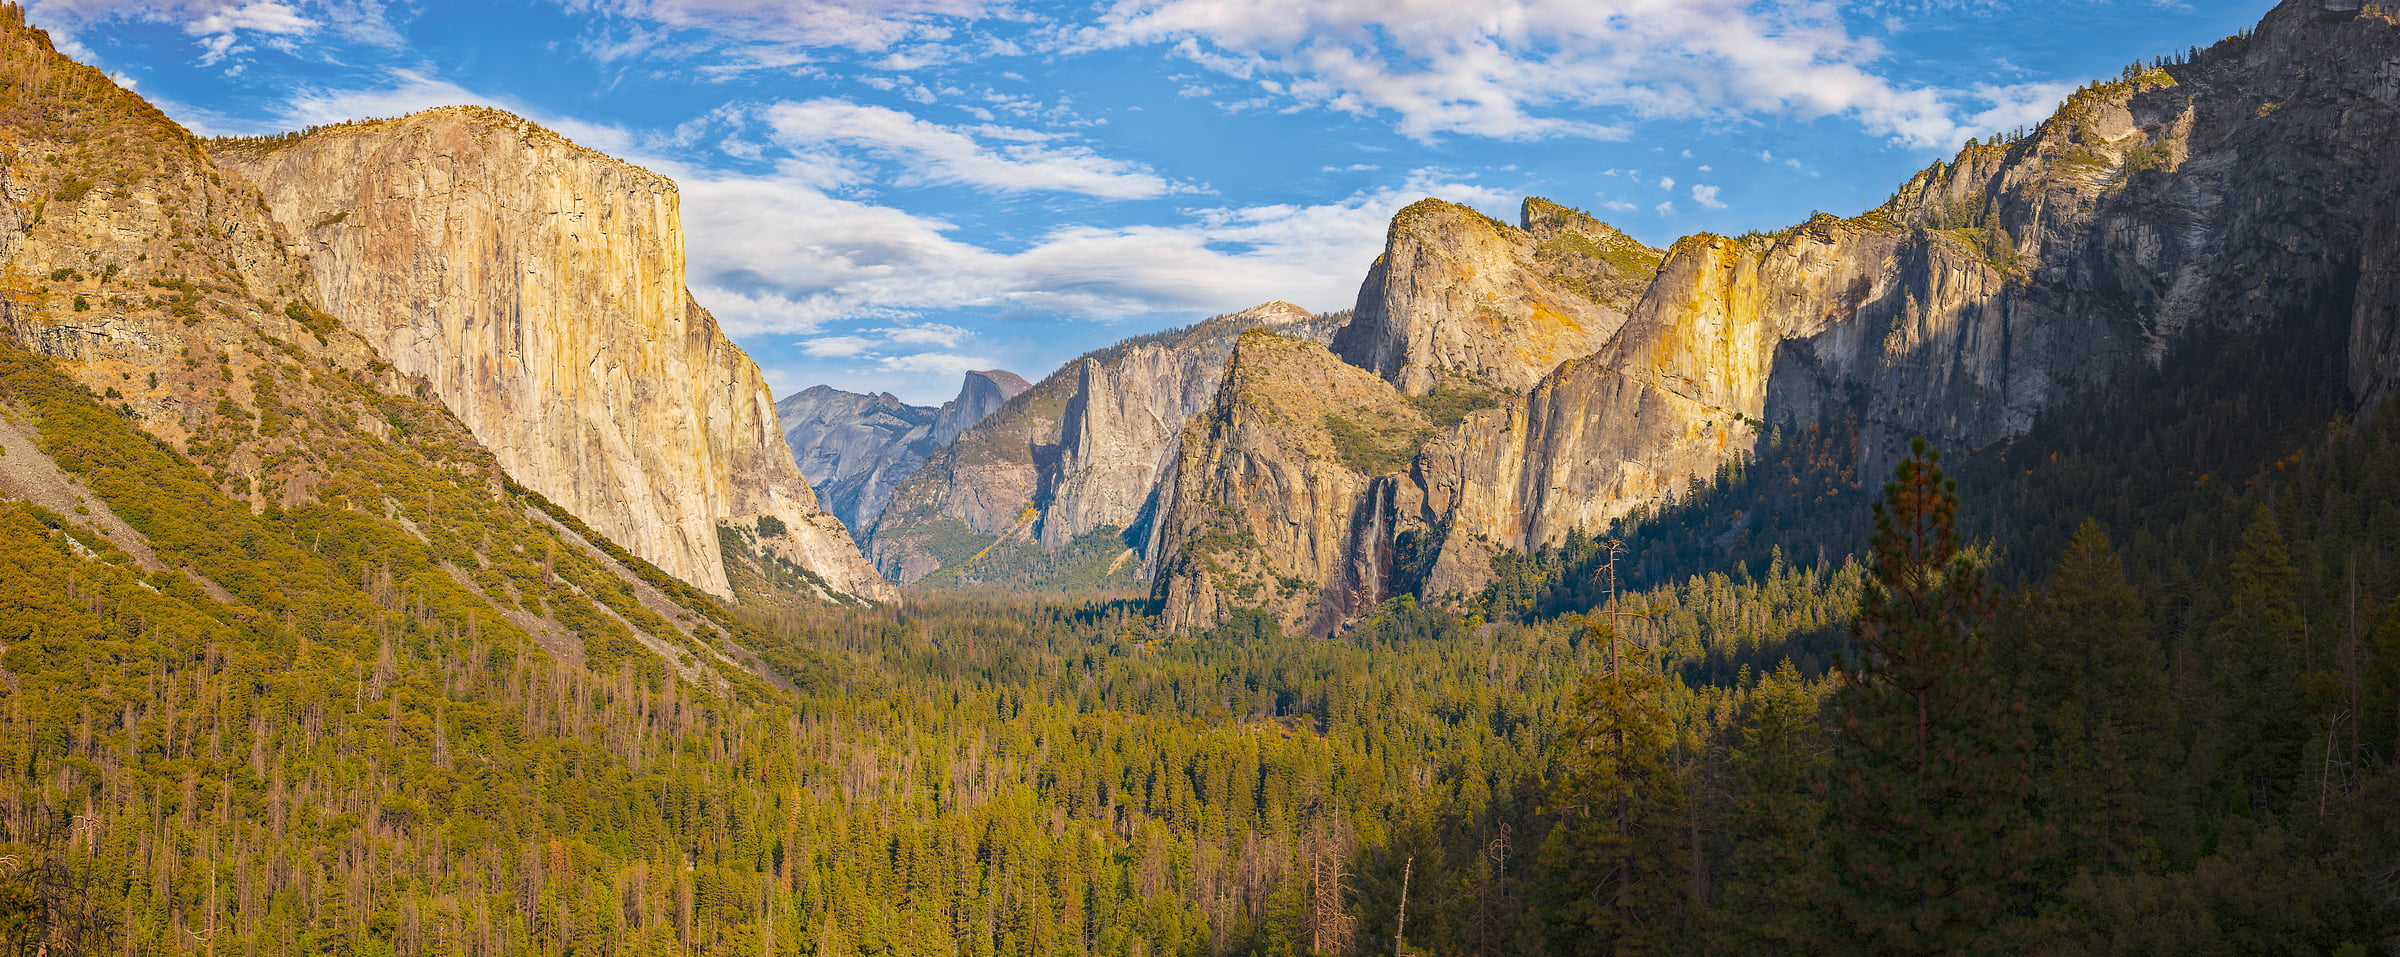 3,152 megapixels! A very high resolution, large-format VAST photo print of a landscape in Yosemite; photograph created by John Freeman at Tunnel View Overlook in Yosemite National Park, CA